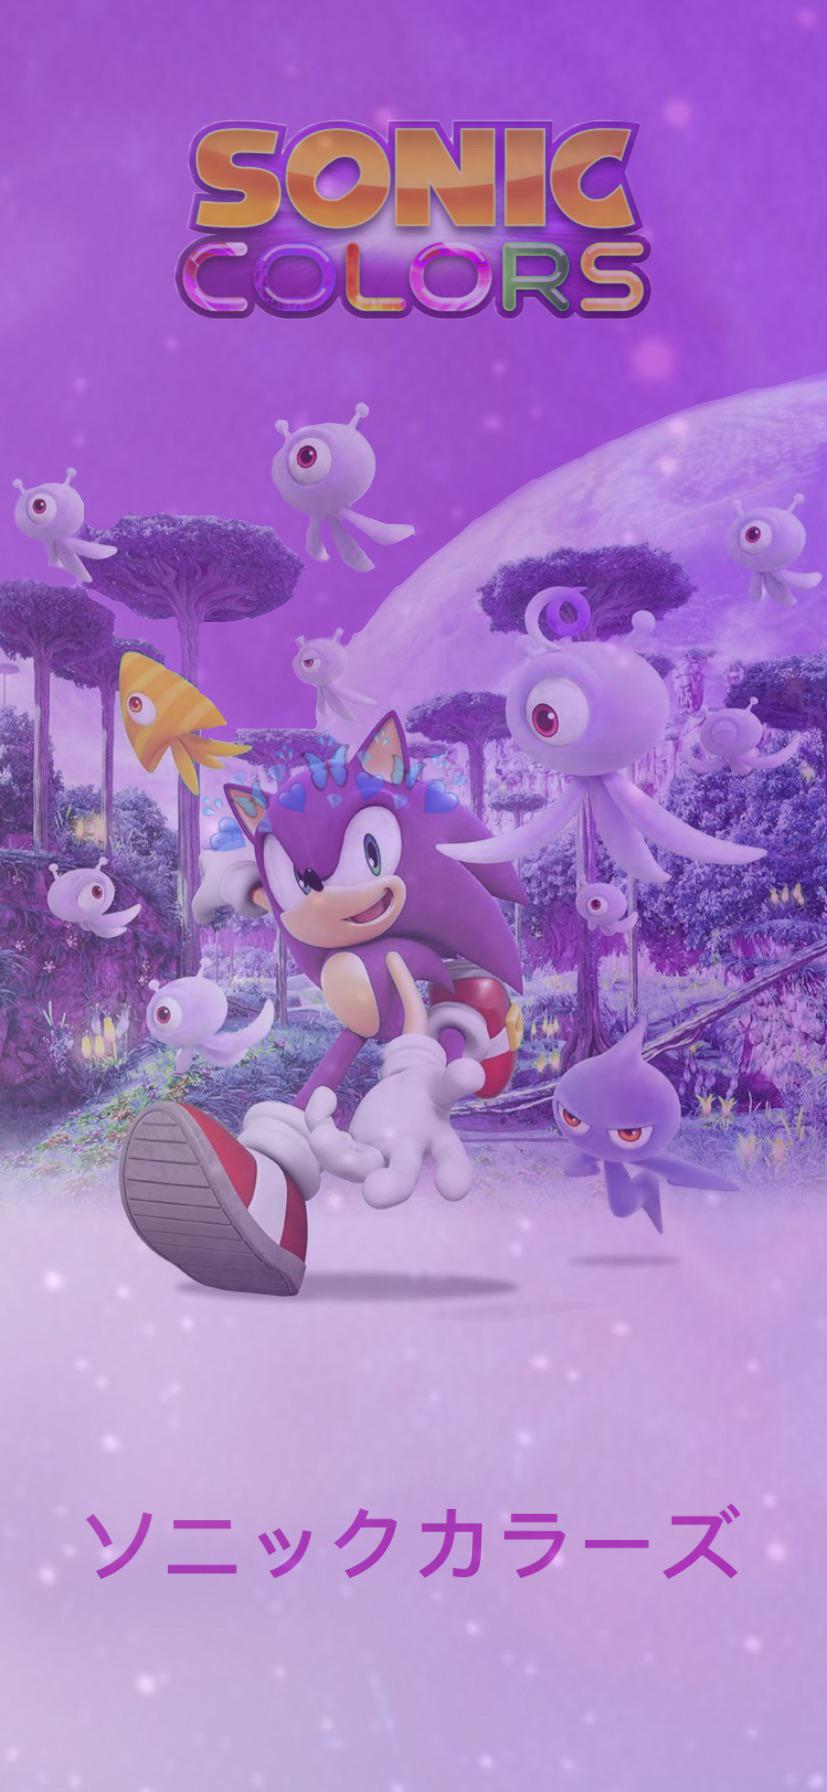 Some asthenic sonic colors iphone wallpaper to commemorate its 10th anniversary, free to use!